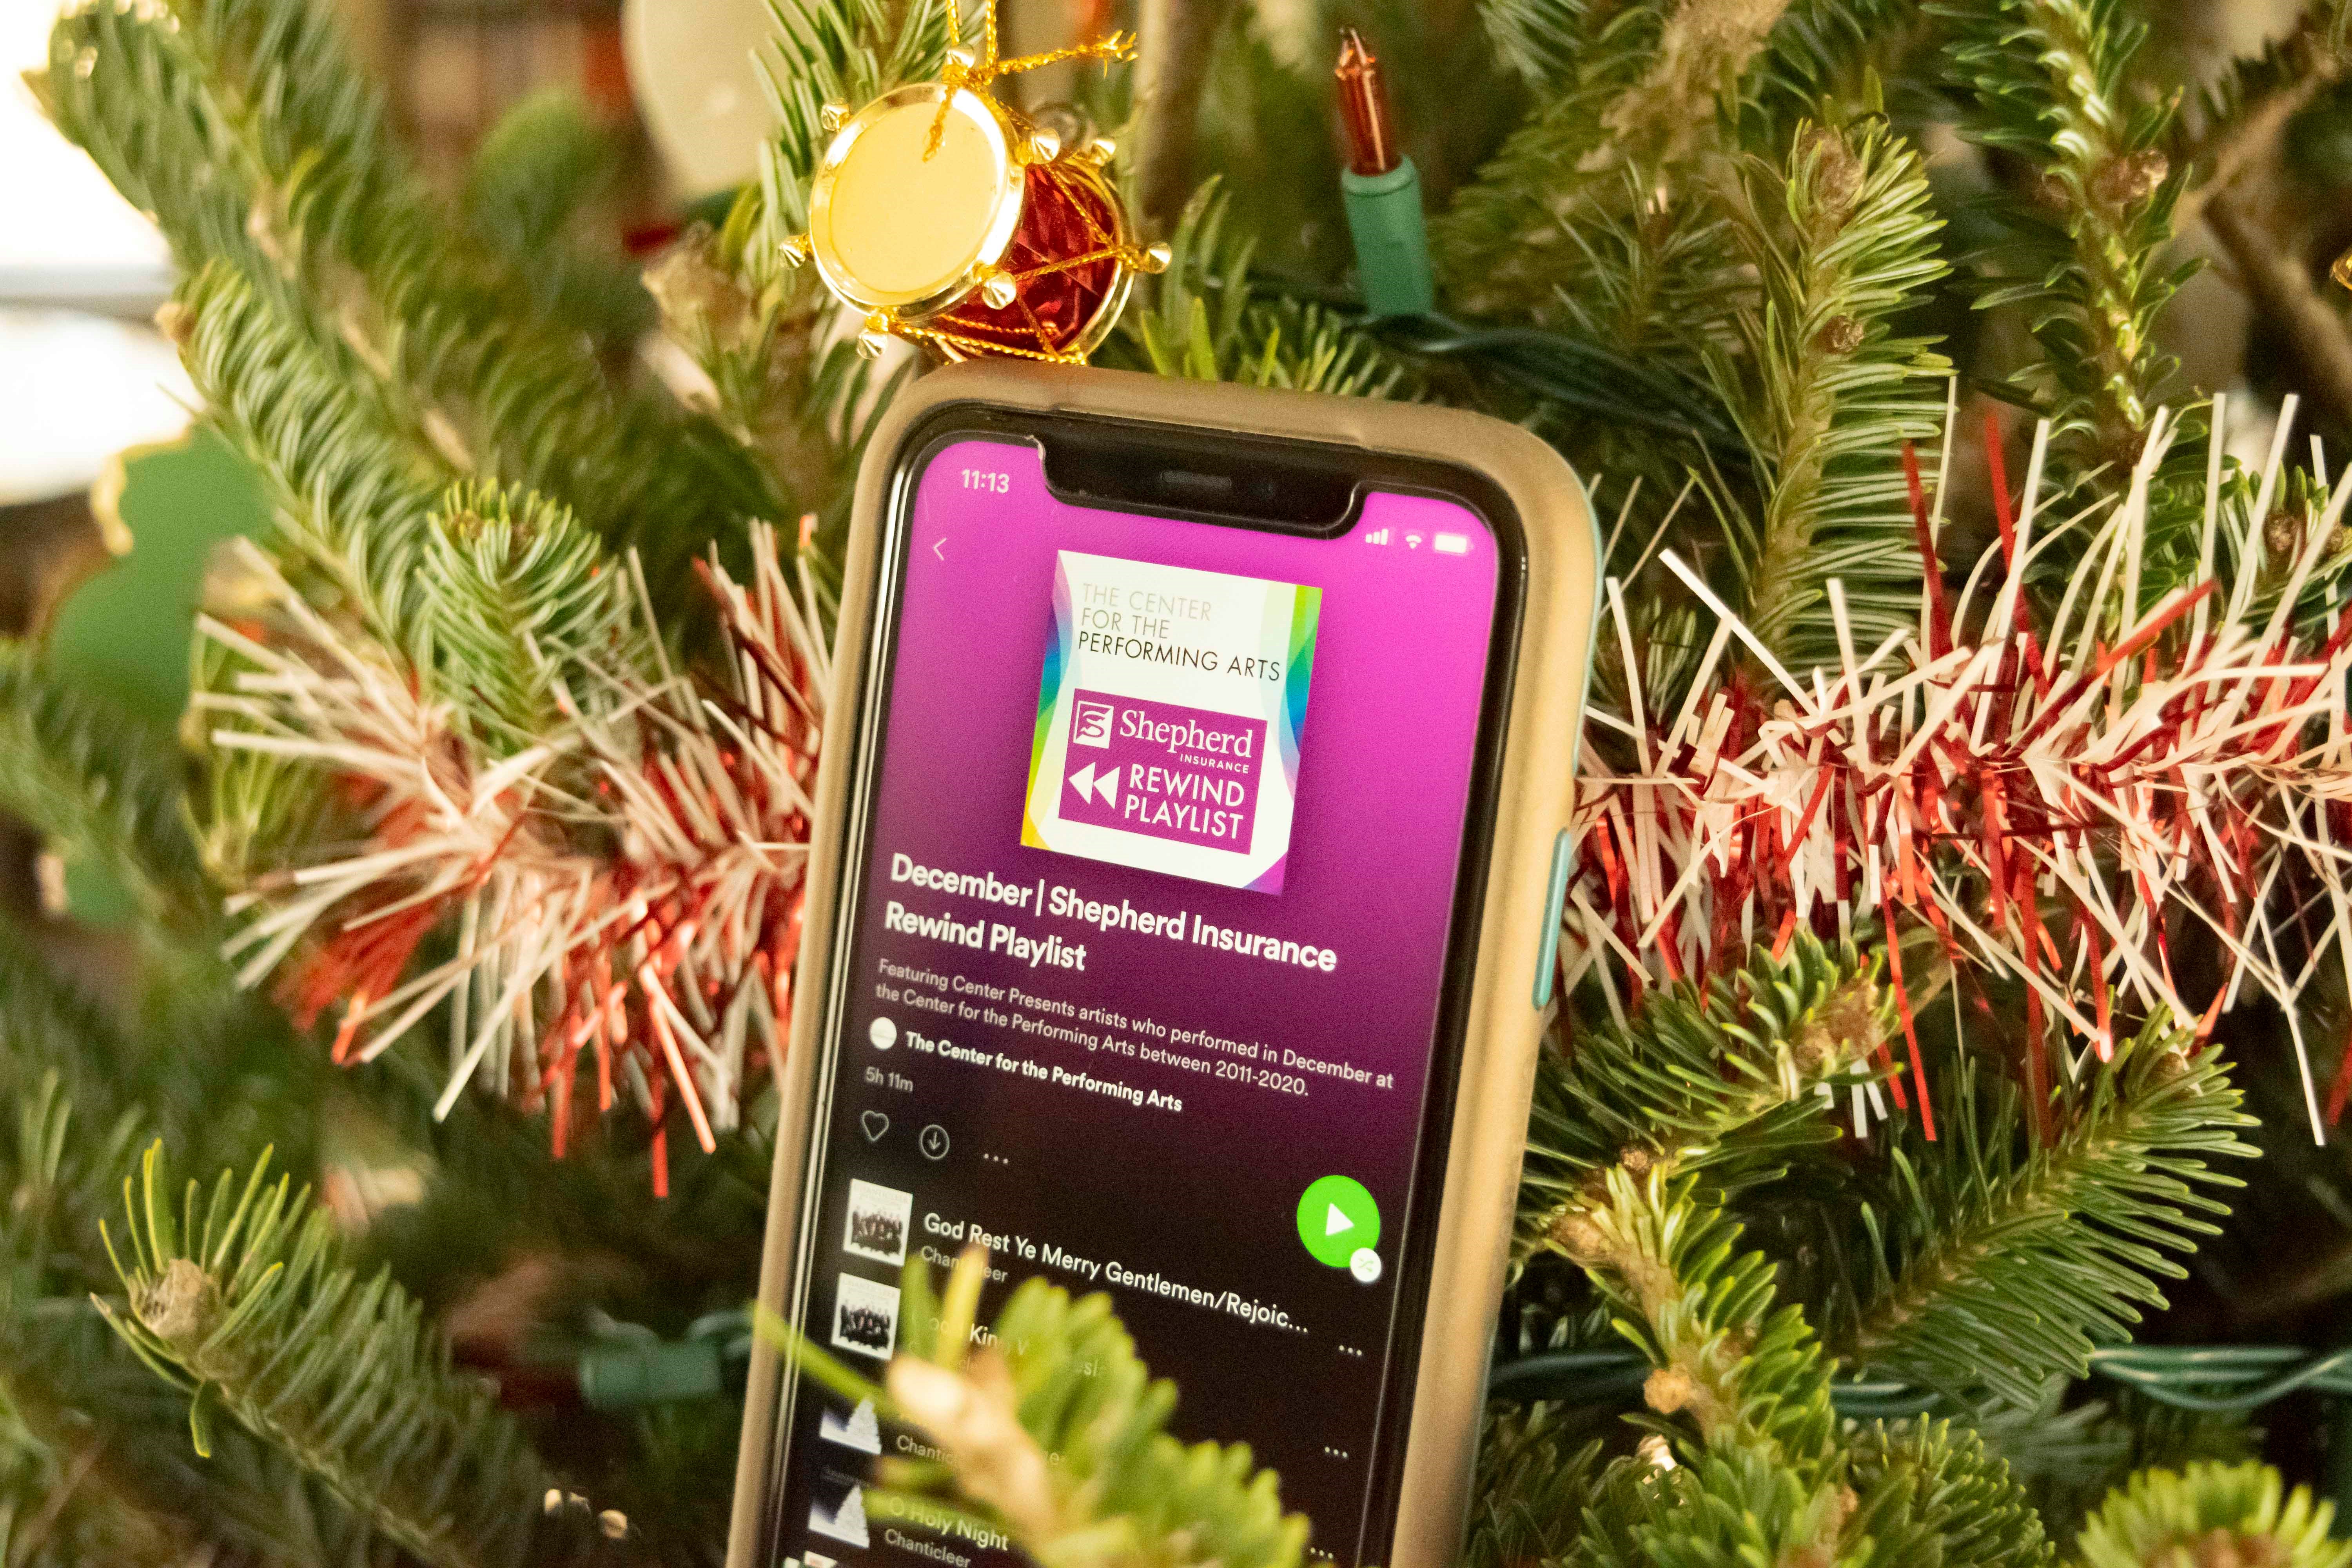 A smart phone hangs in a Christmas tree